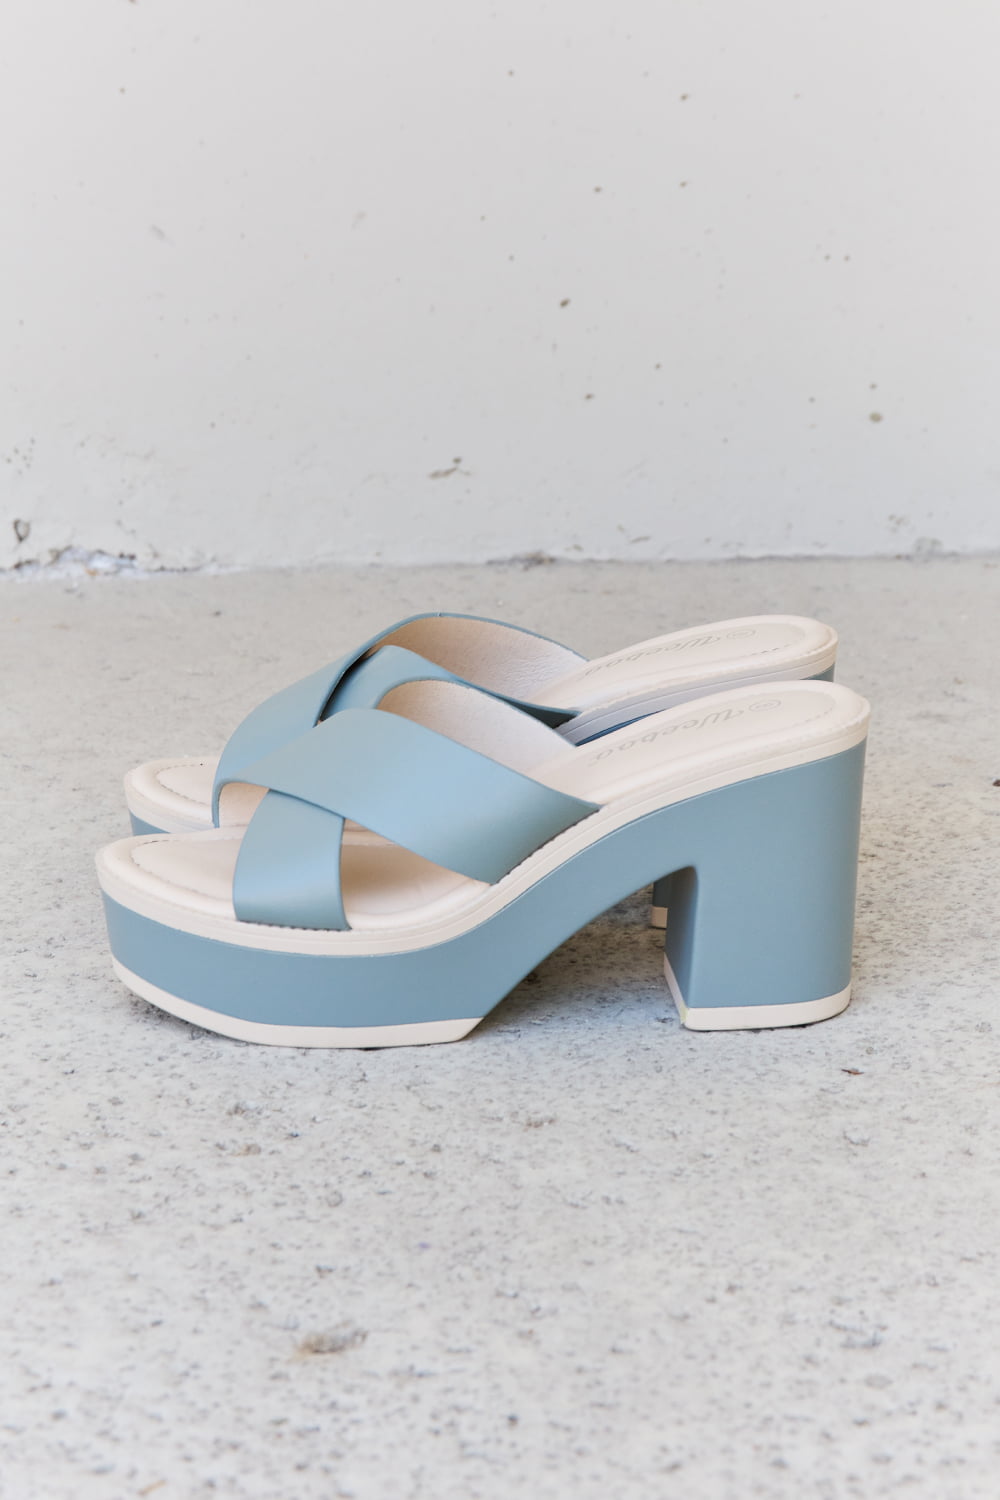 Weeboo Cherish The Moments Contrast Platform Sandals in Misty Blue Print on any thing USA/STOD clothes